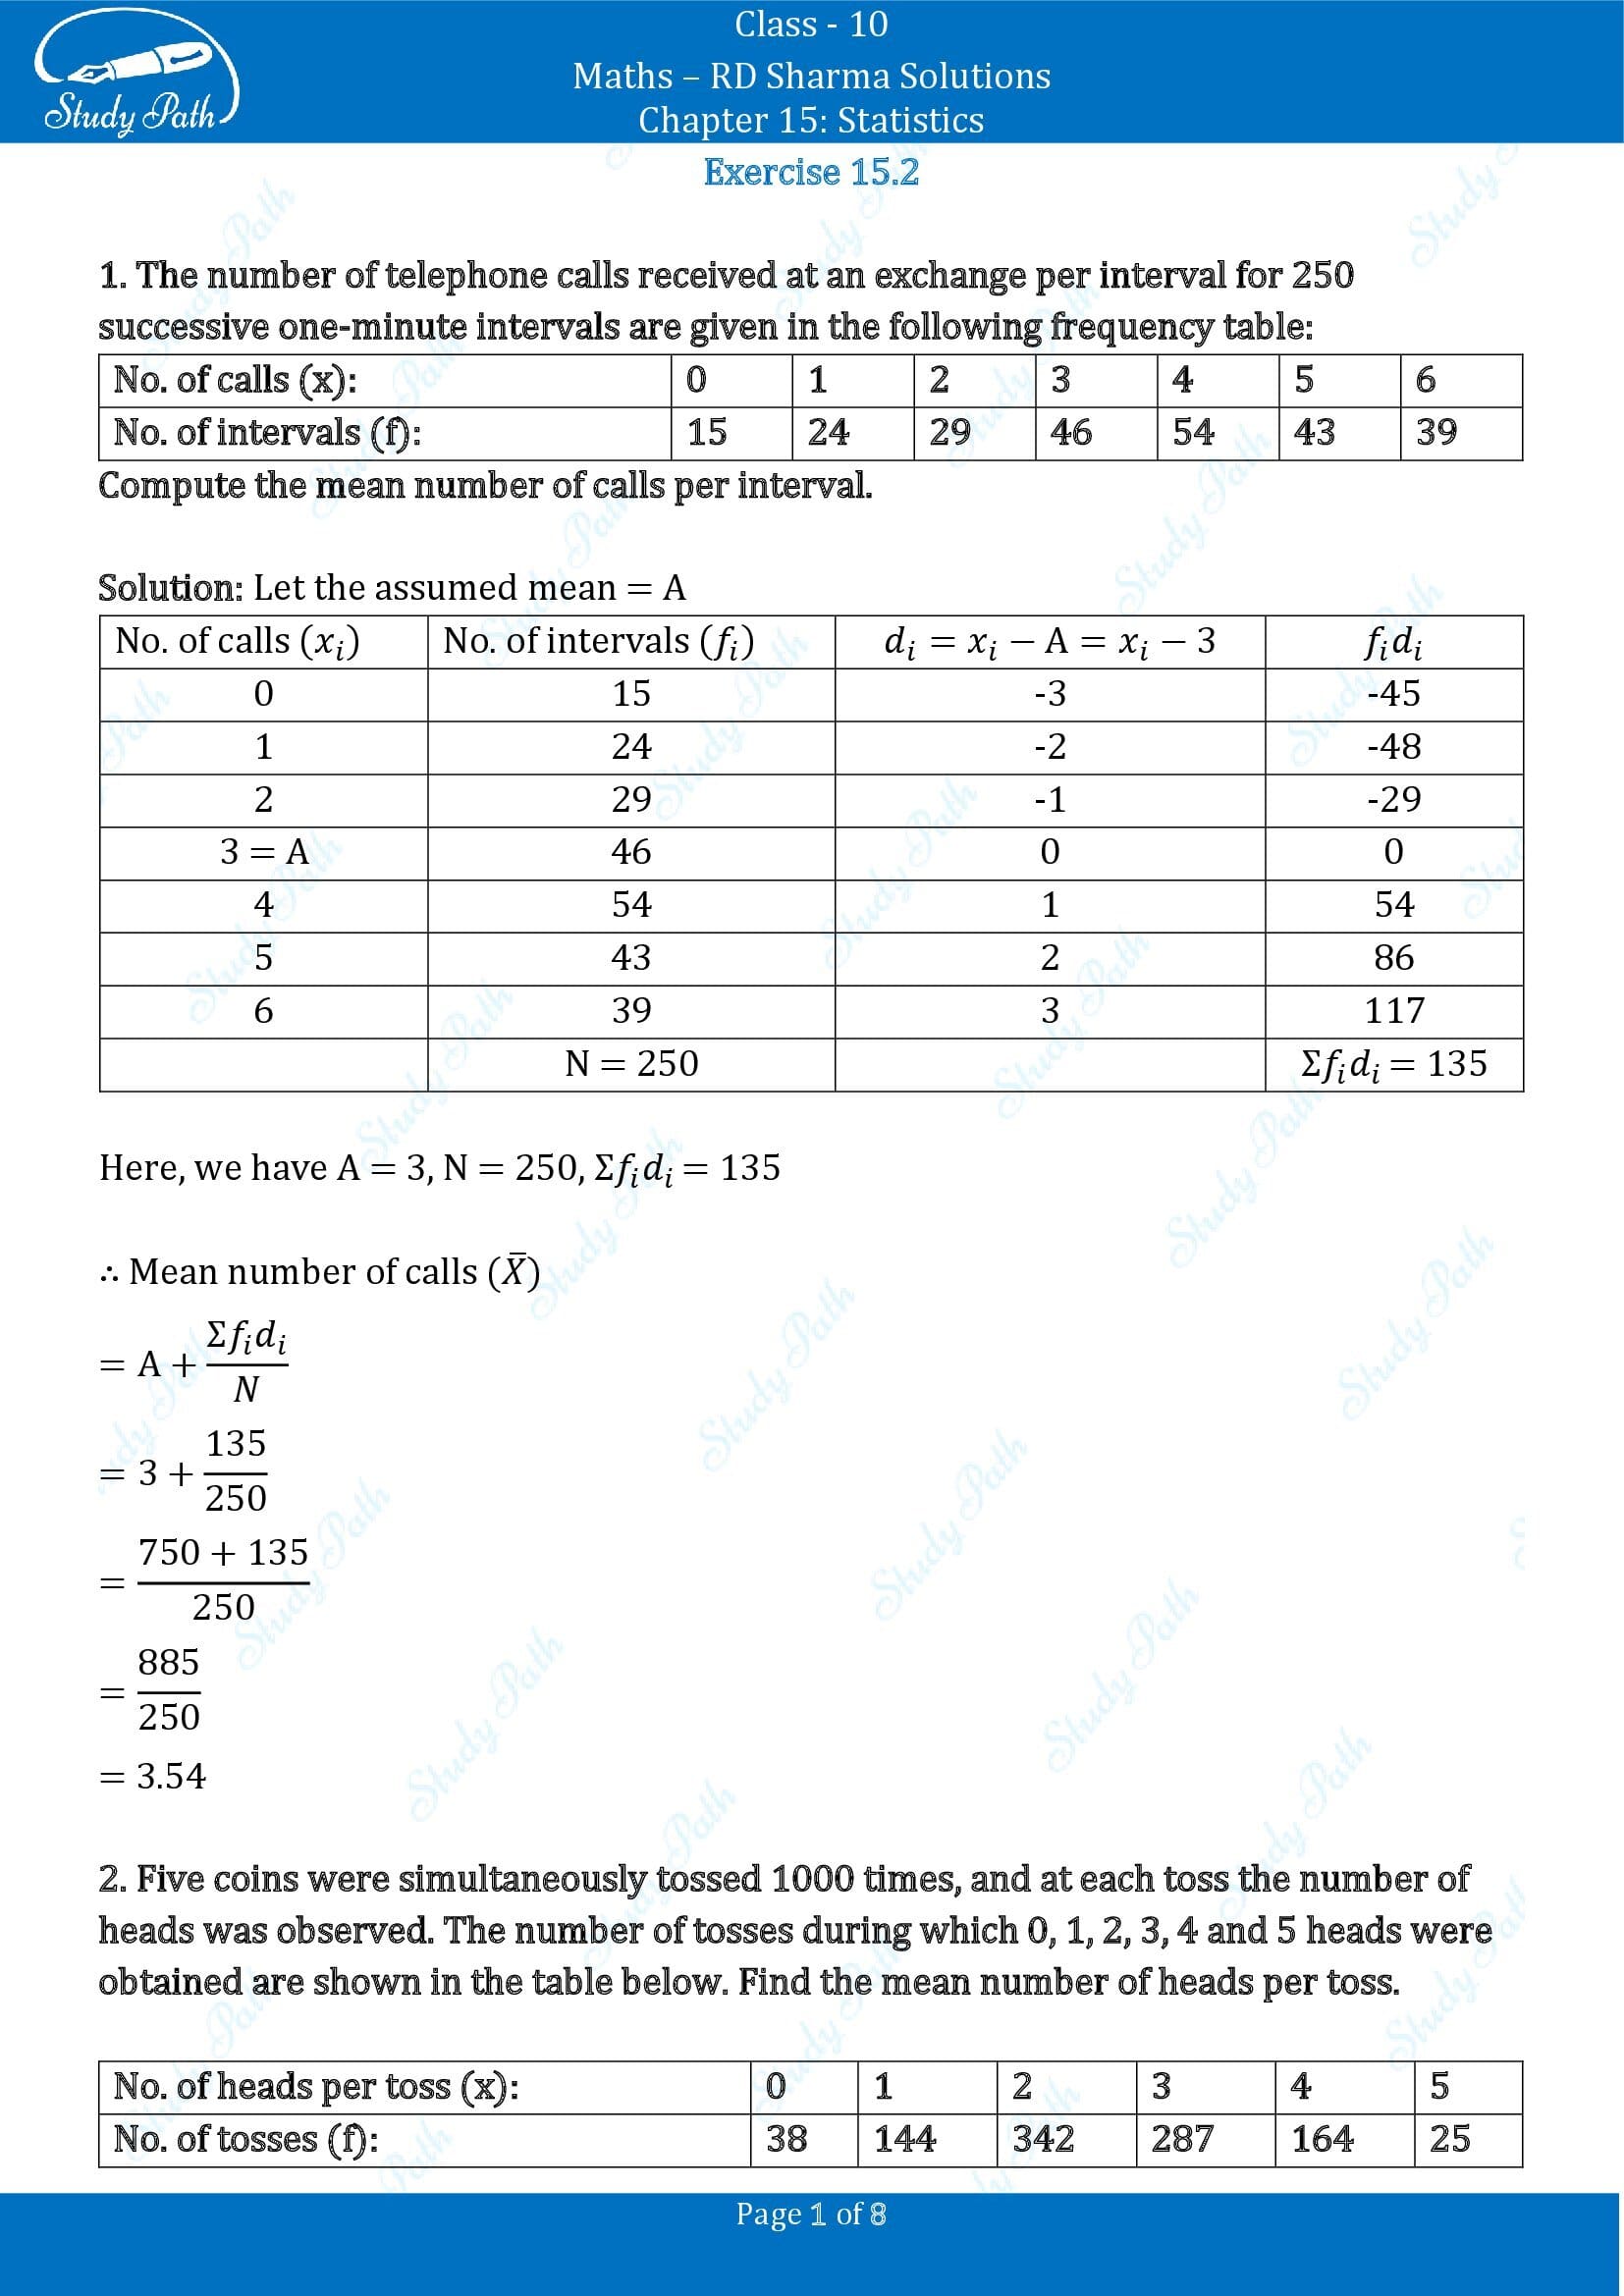 RD Sharma Solutions Class 10 Chapter 15 Statistics Exercise 15.2 00001